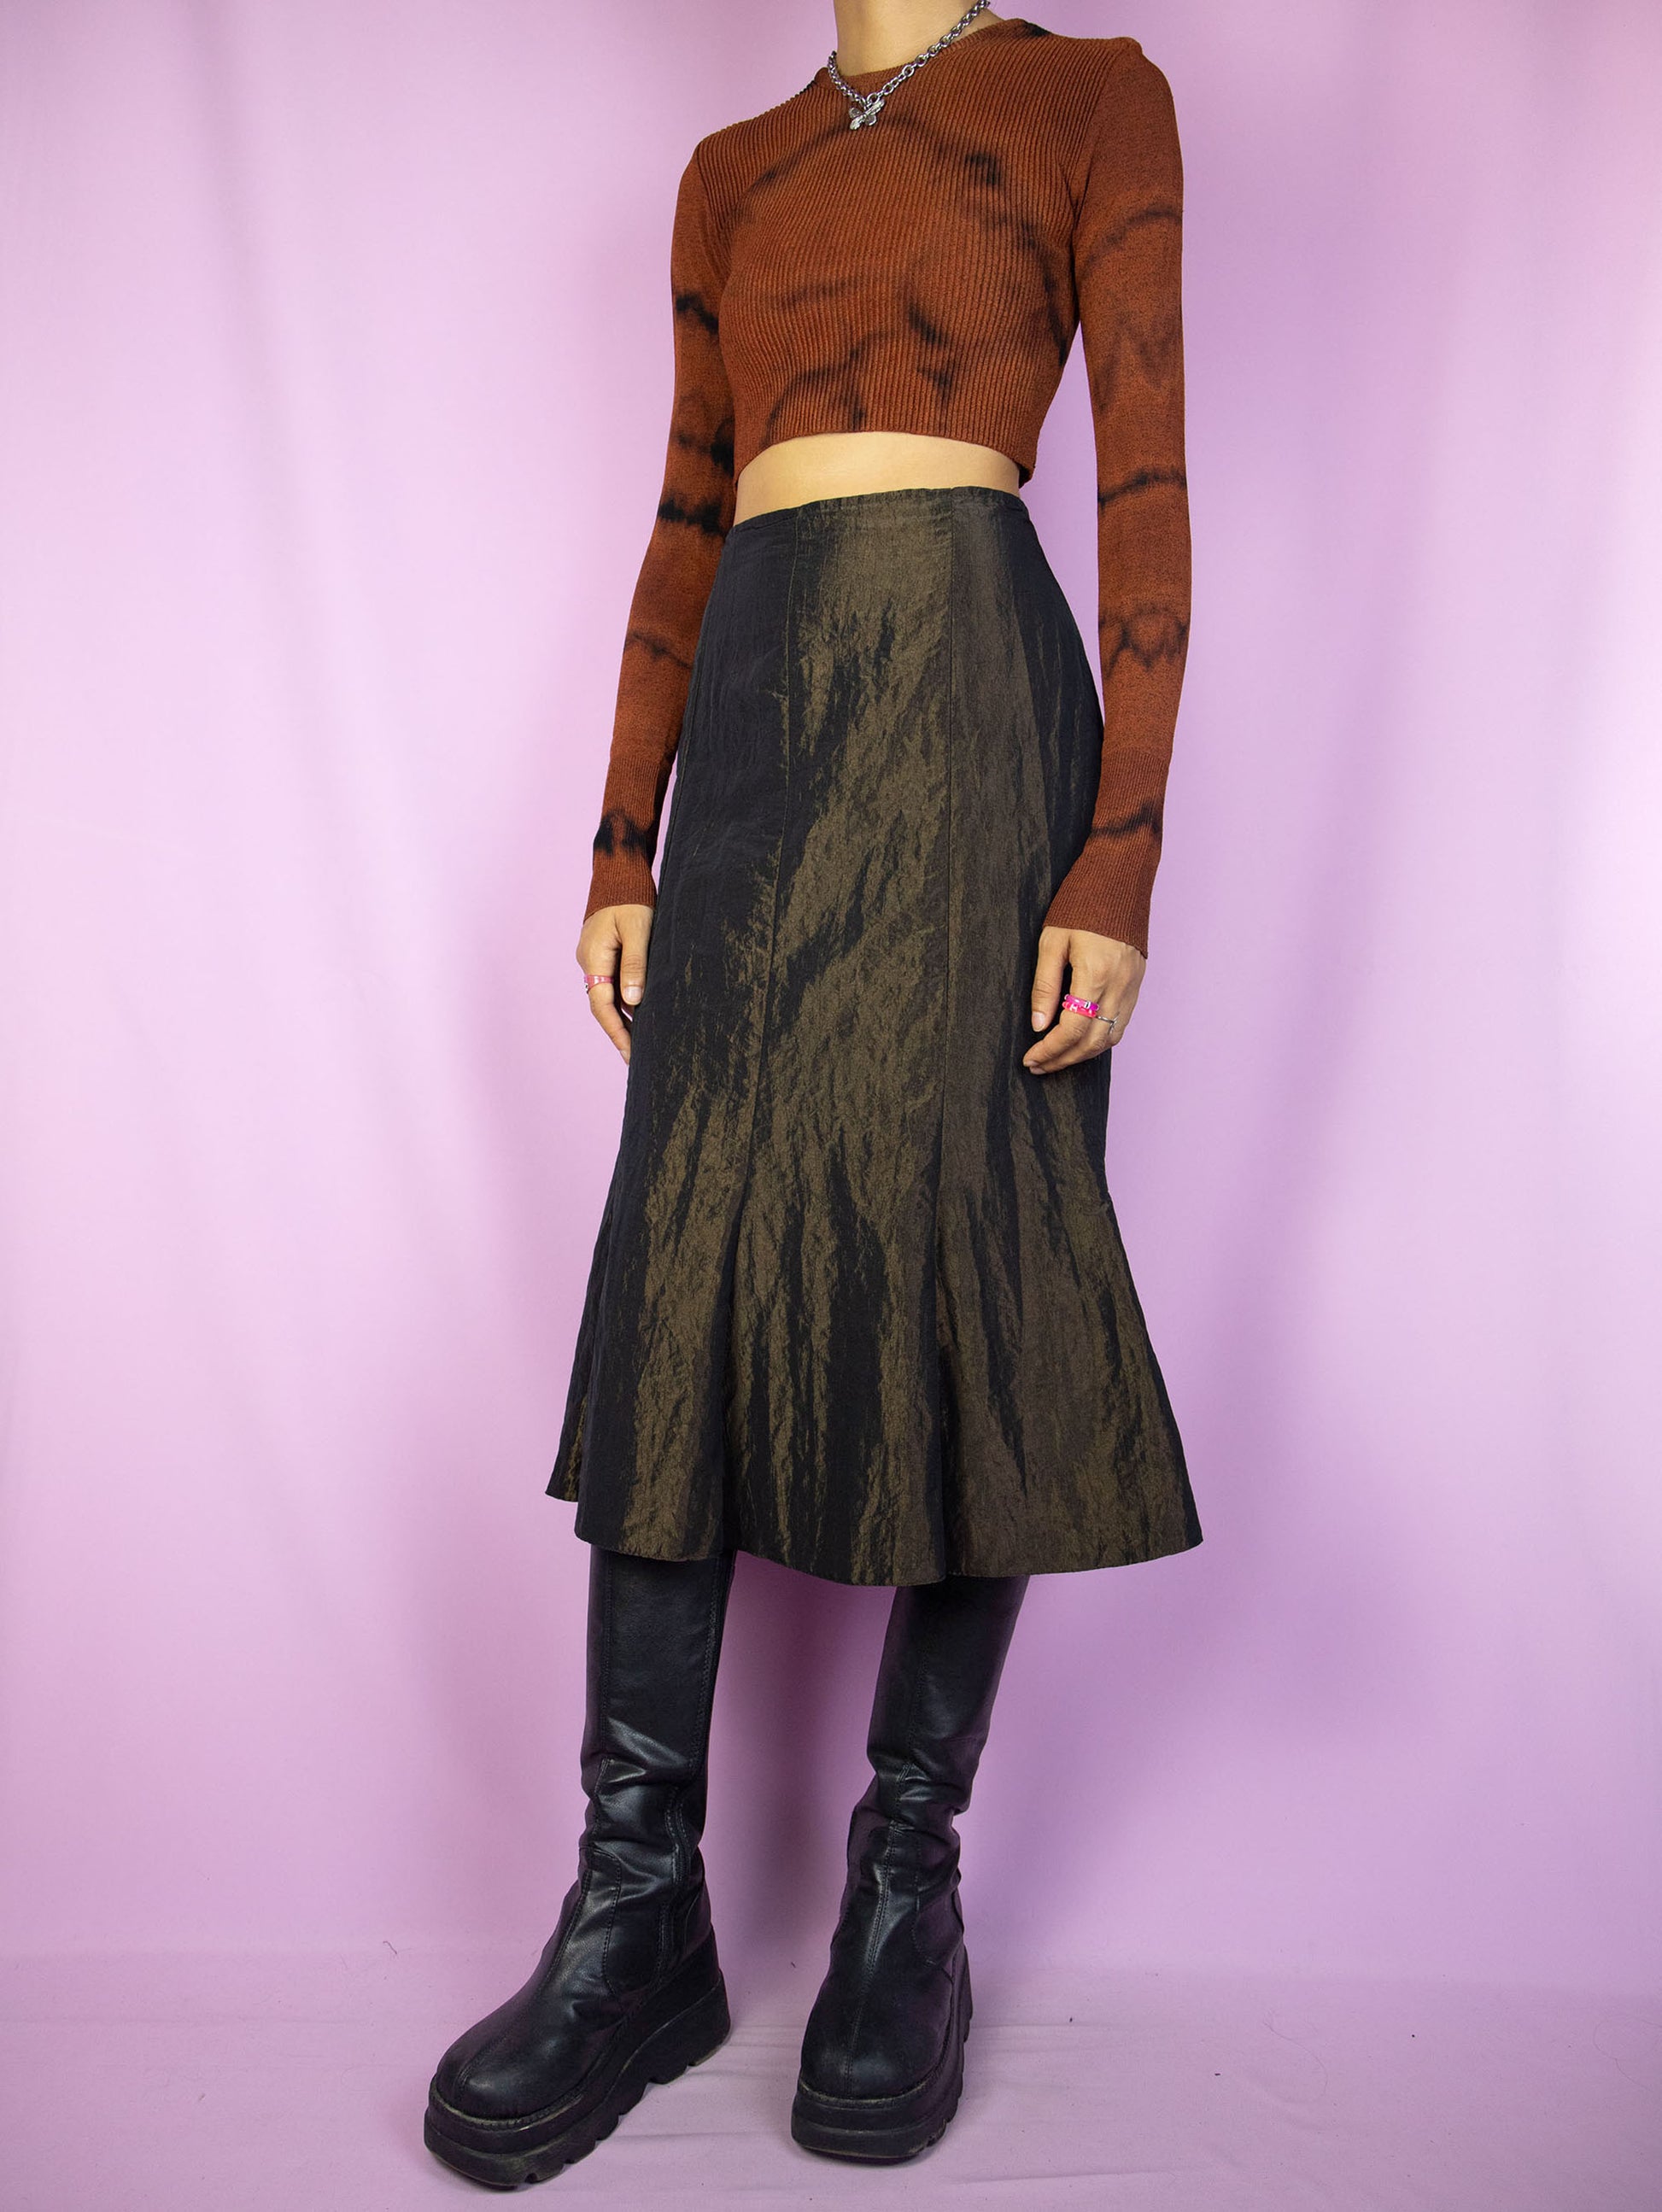 The Vintage 90s Brown Trumpet Midi Skirt is a dark iridescent mermaid skirt with a back zipper closure. Elegant fairy grunge whimsygoth style 1990s evening party maxi skirt. Excellent vintage condition.